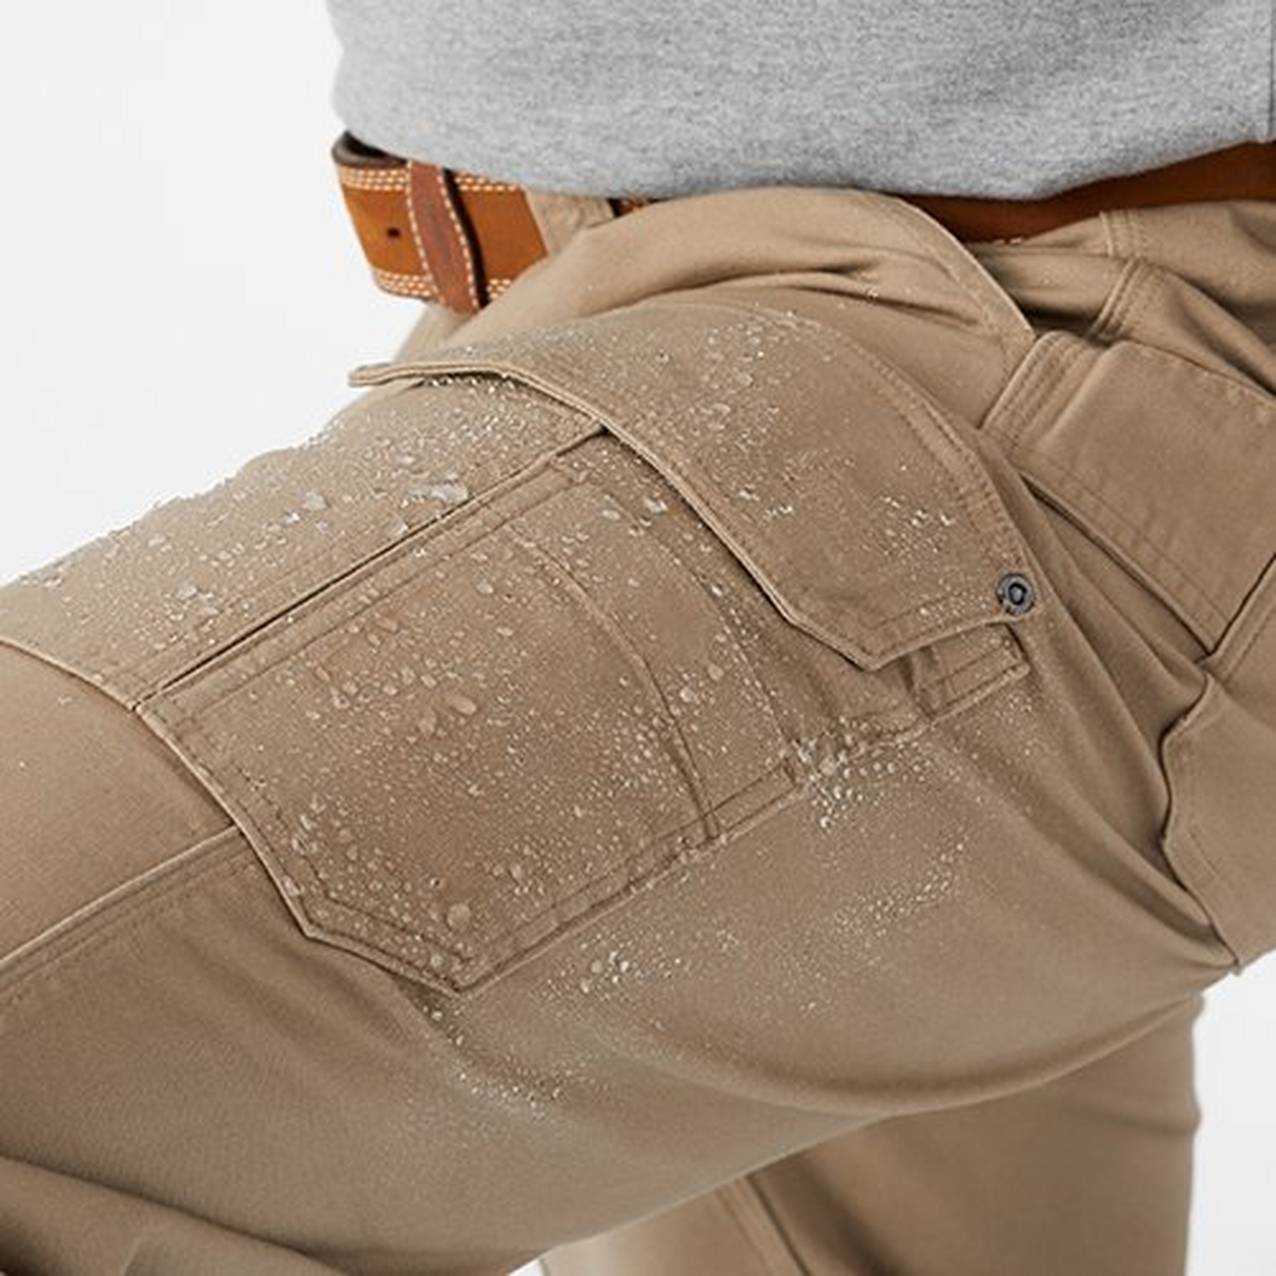 Close up of water beading up on fire hose pants